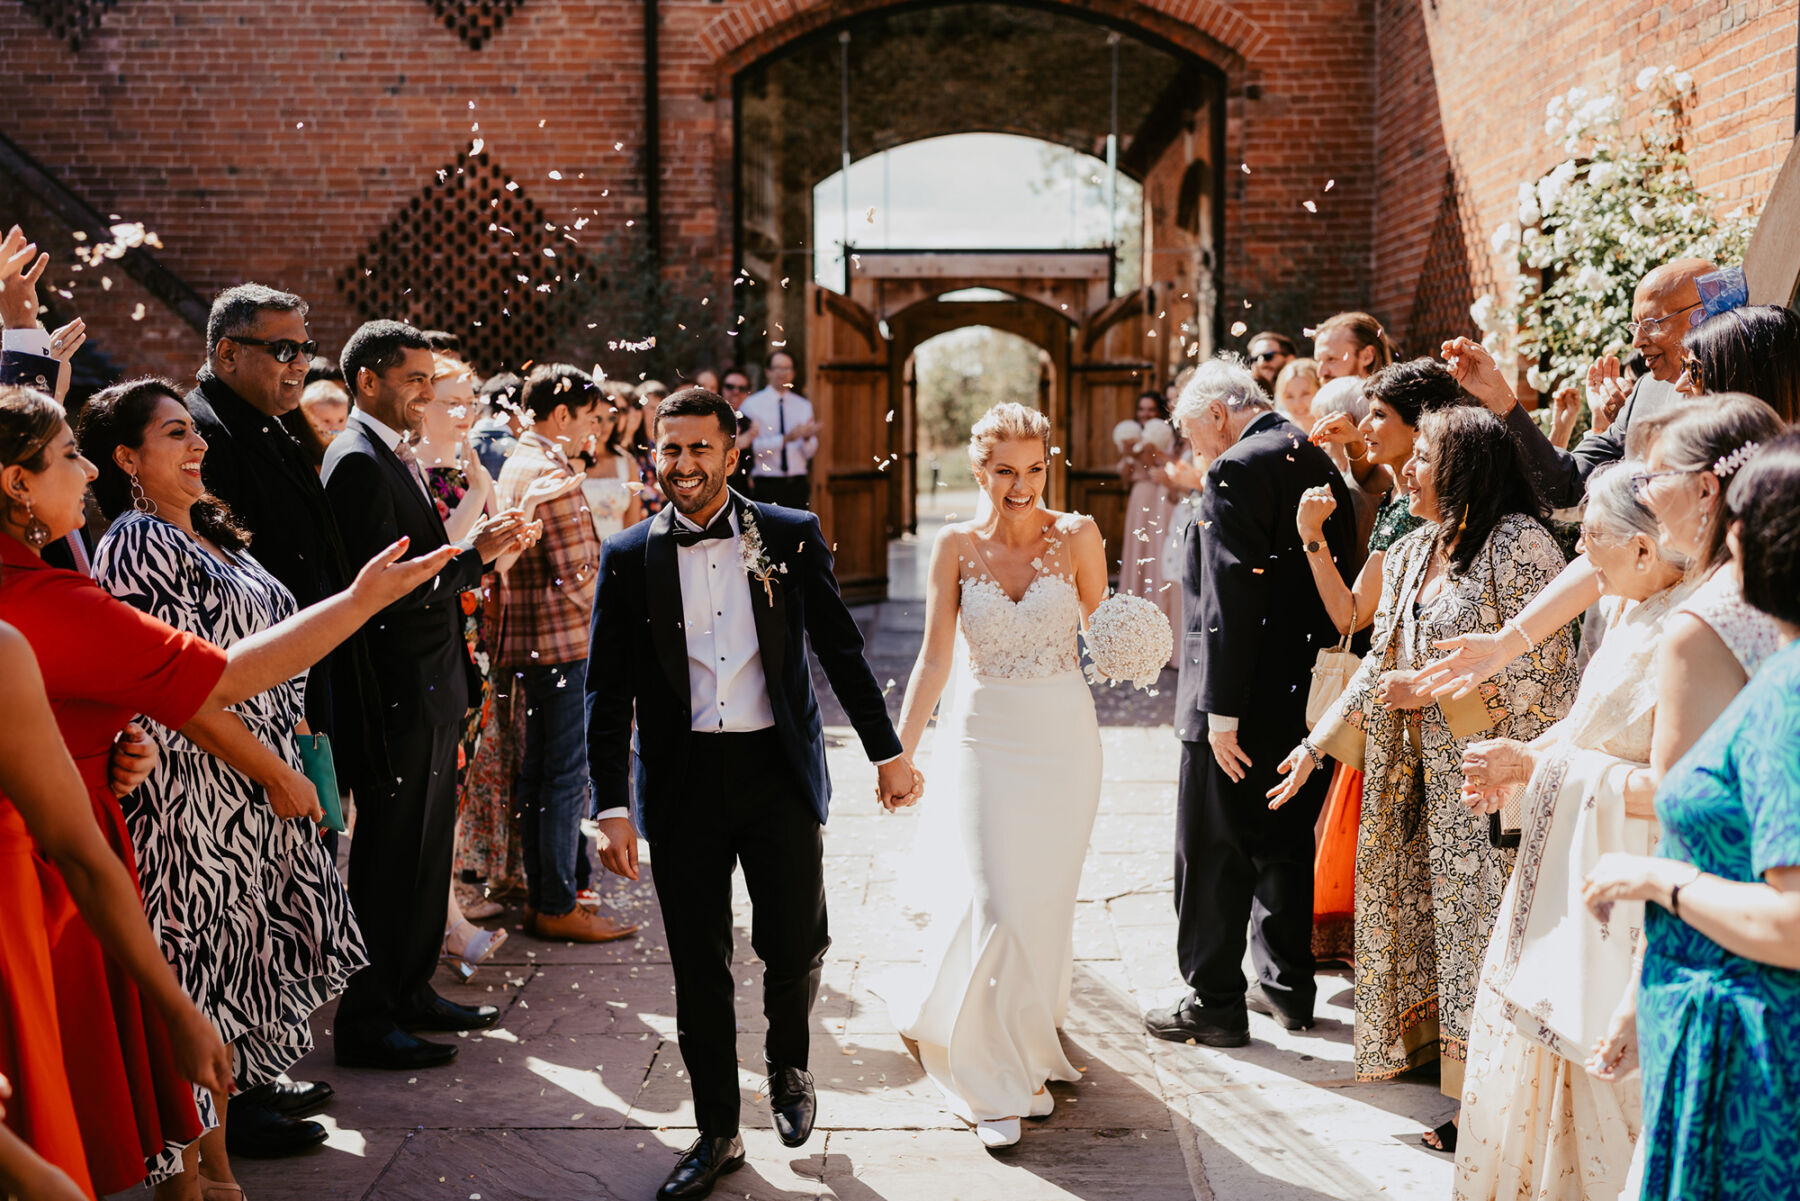 Mixed race bride and groom in a shower of confetti at Shustoke barn wedding venue.